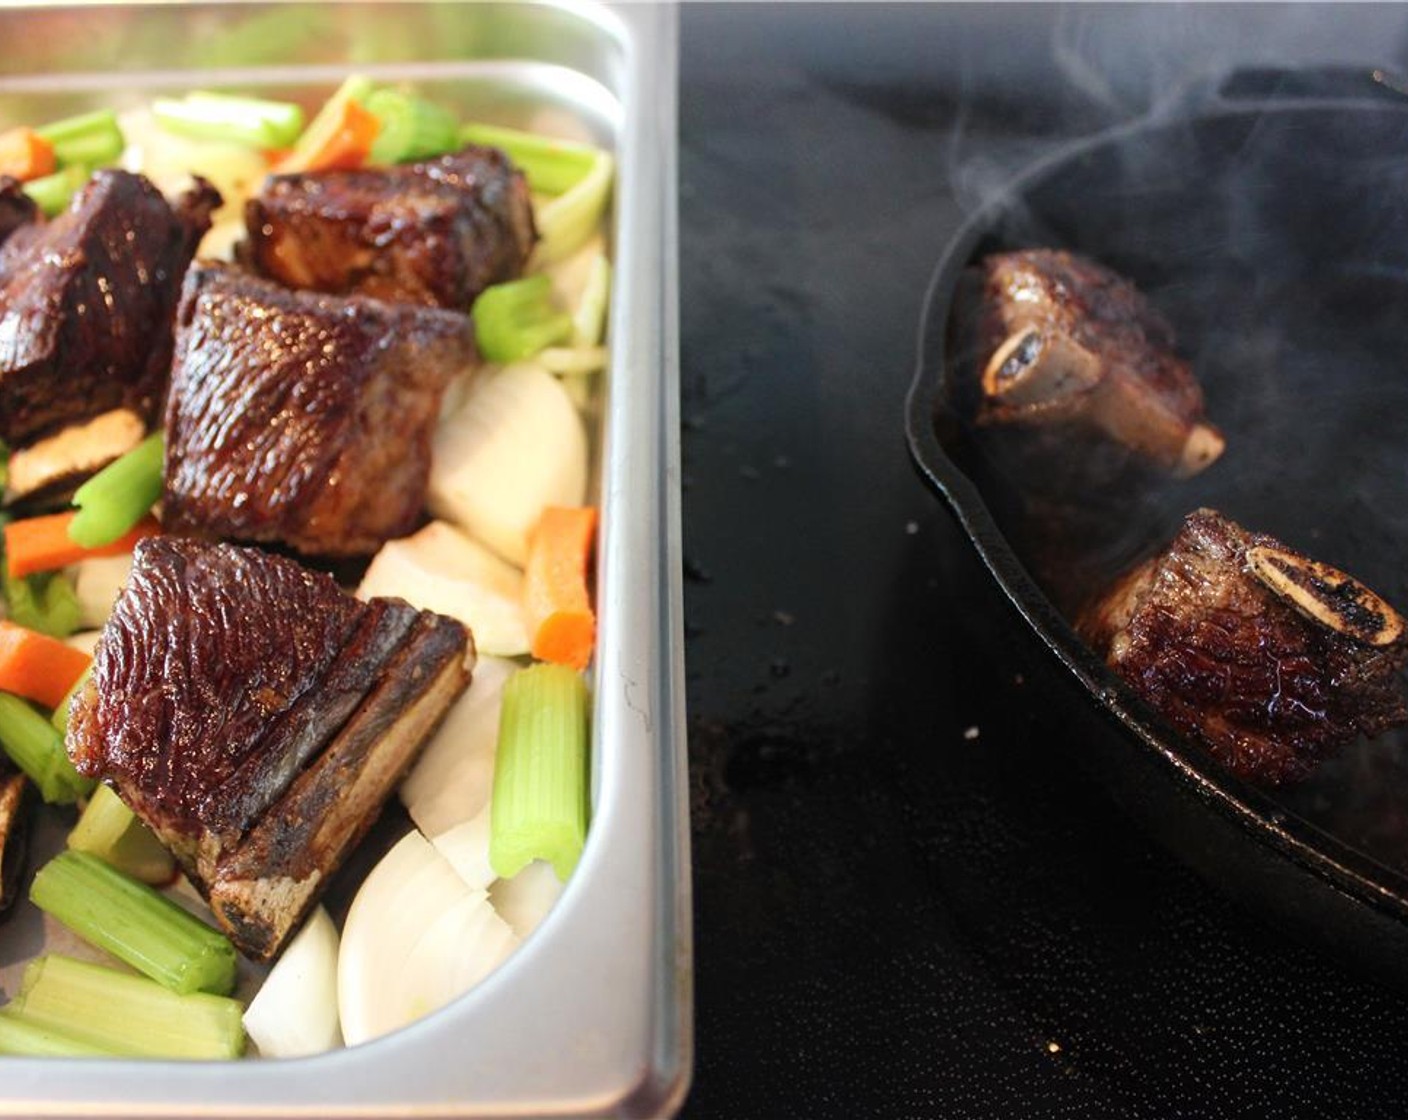 step 3 Place the seared short ribs in the pan with the mirepoix when ready. Sear each side of the rib in the pan until deep color develops.